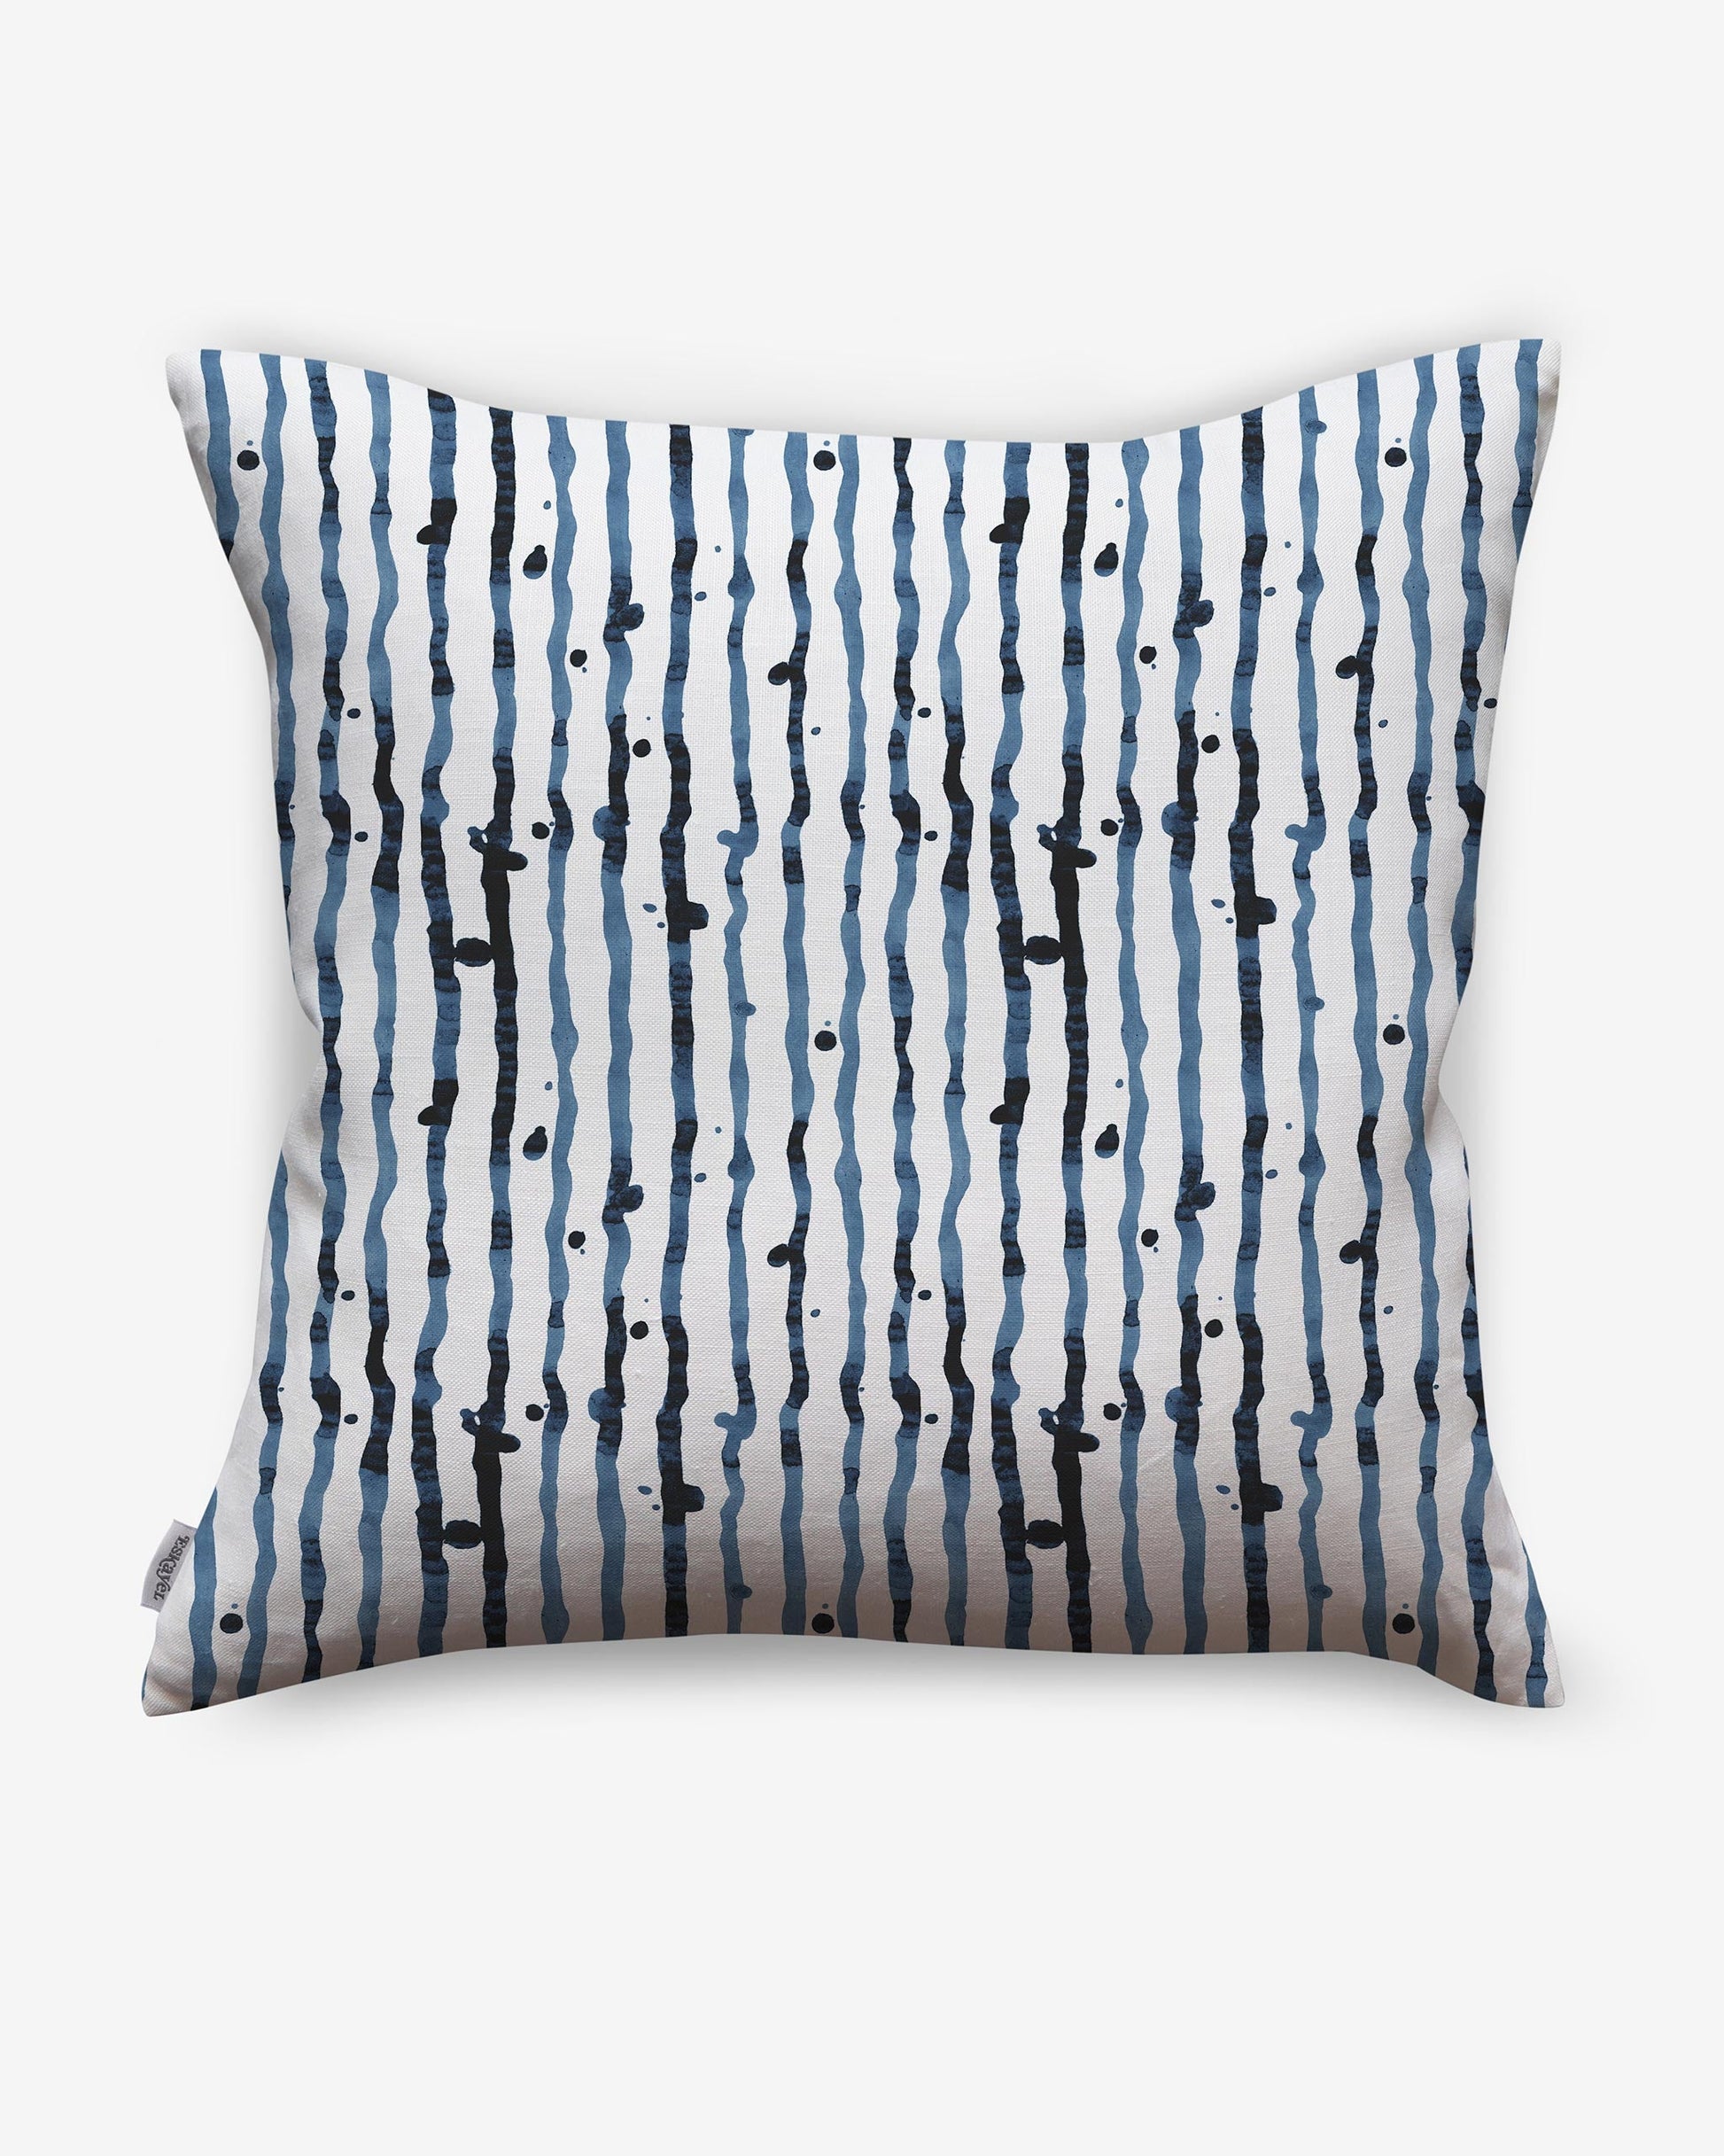 A pillow with a blue and black Drippy Stripe Pillow Azure pattern on it